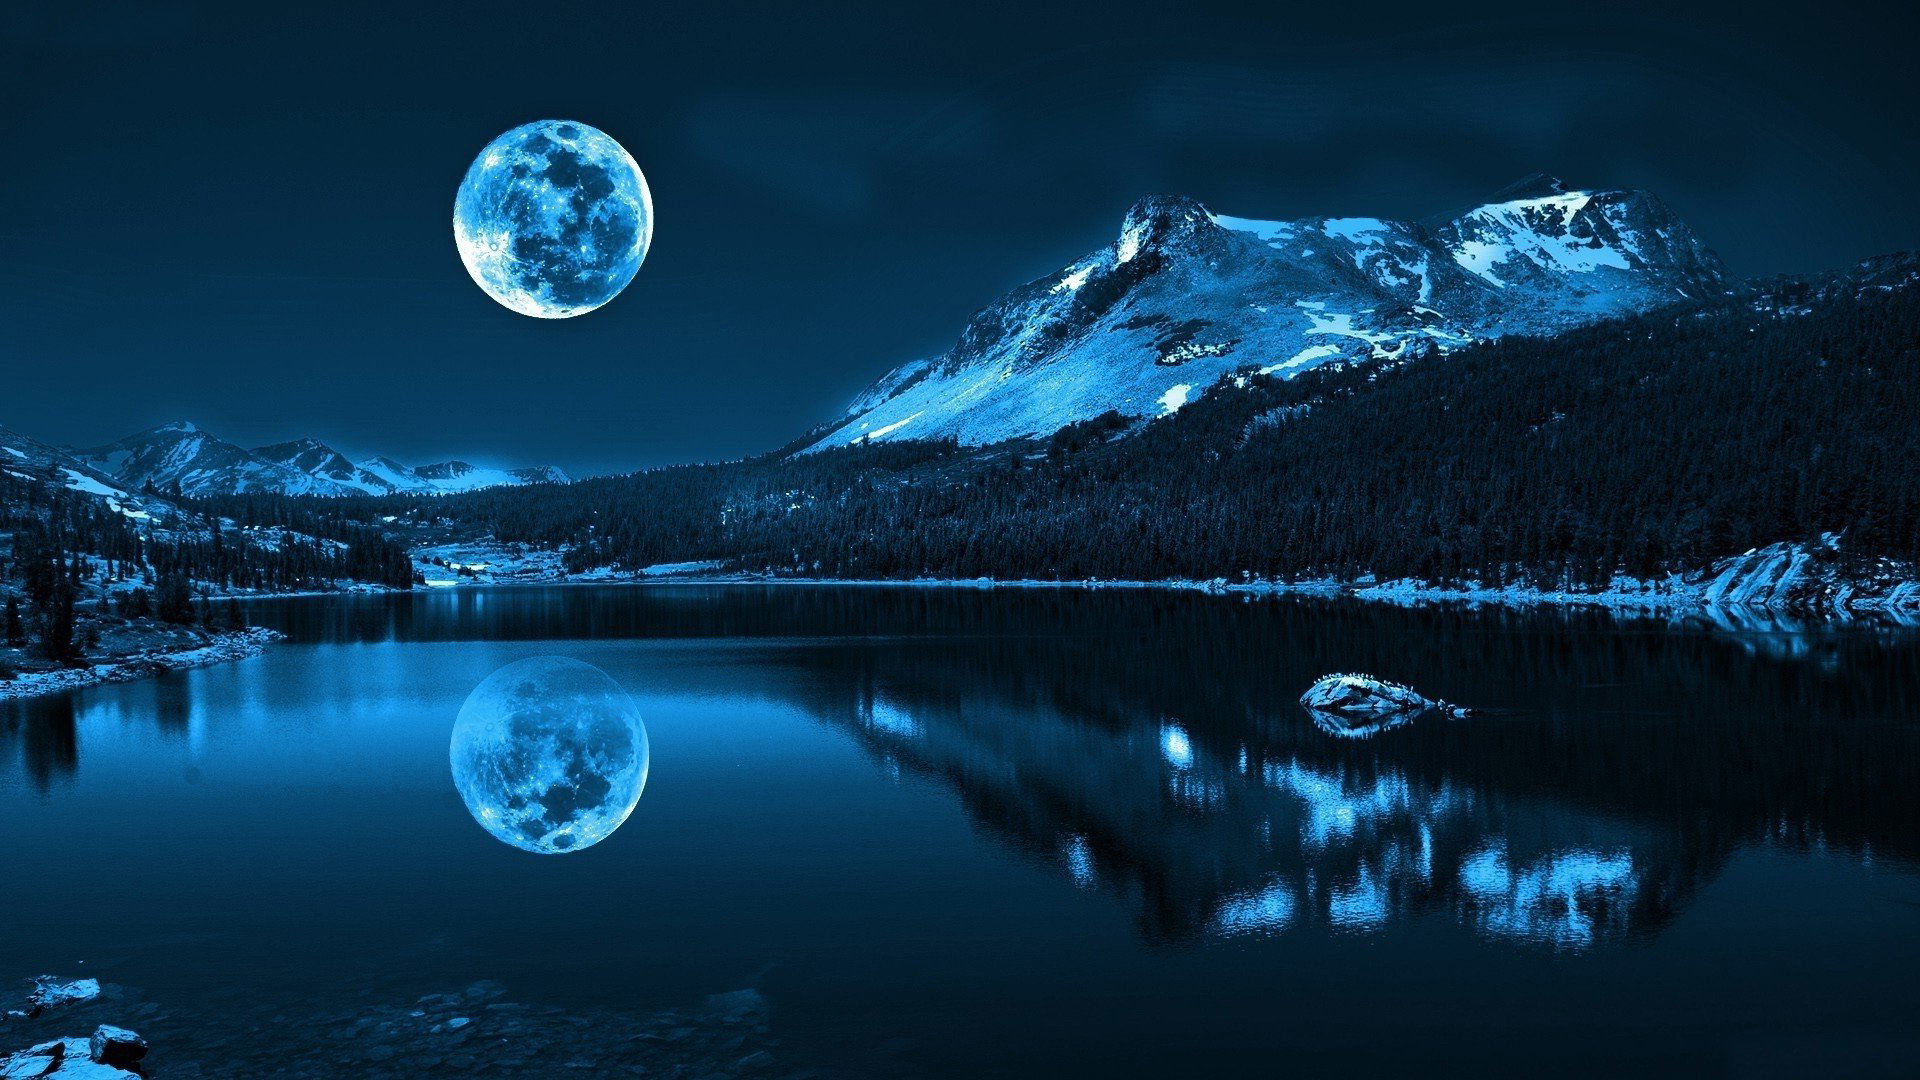 Cold Night Mountains HD Wallpapers  HD Wallpapers  ID 22877